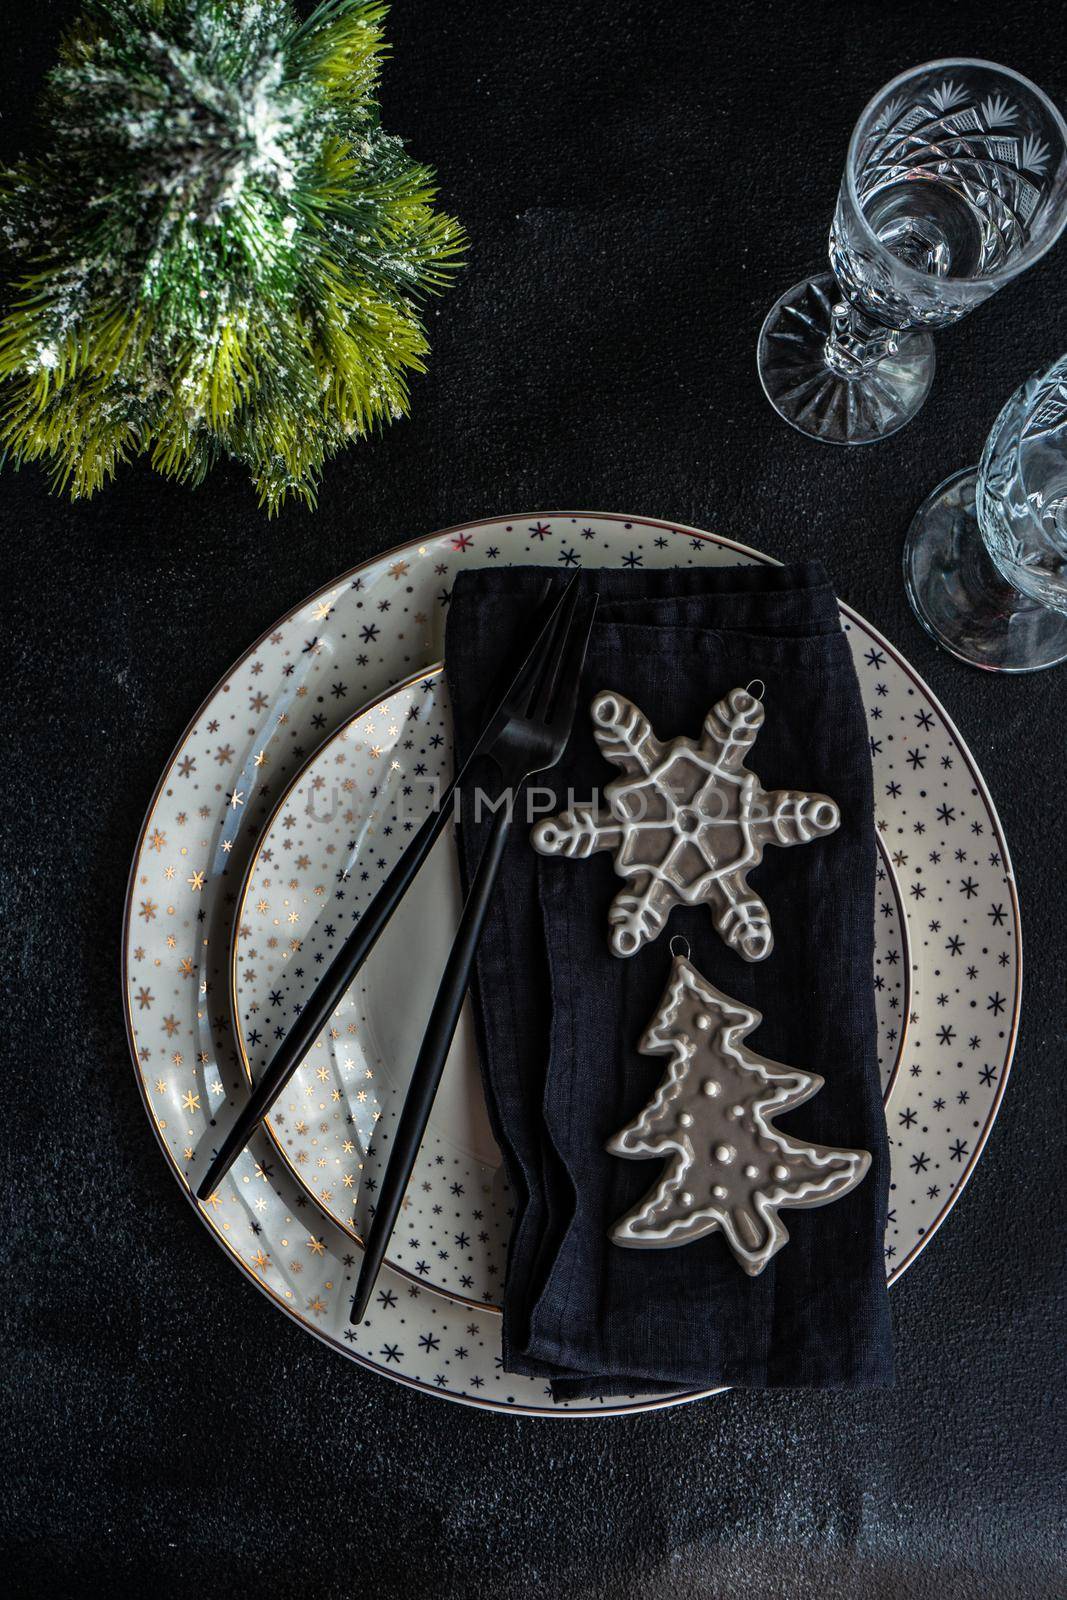 Christmas table setting by Elet